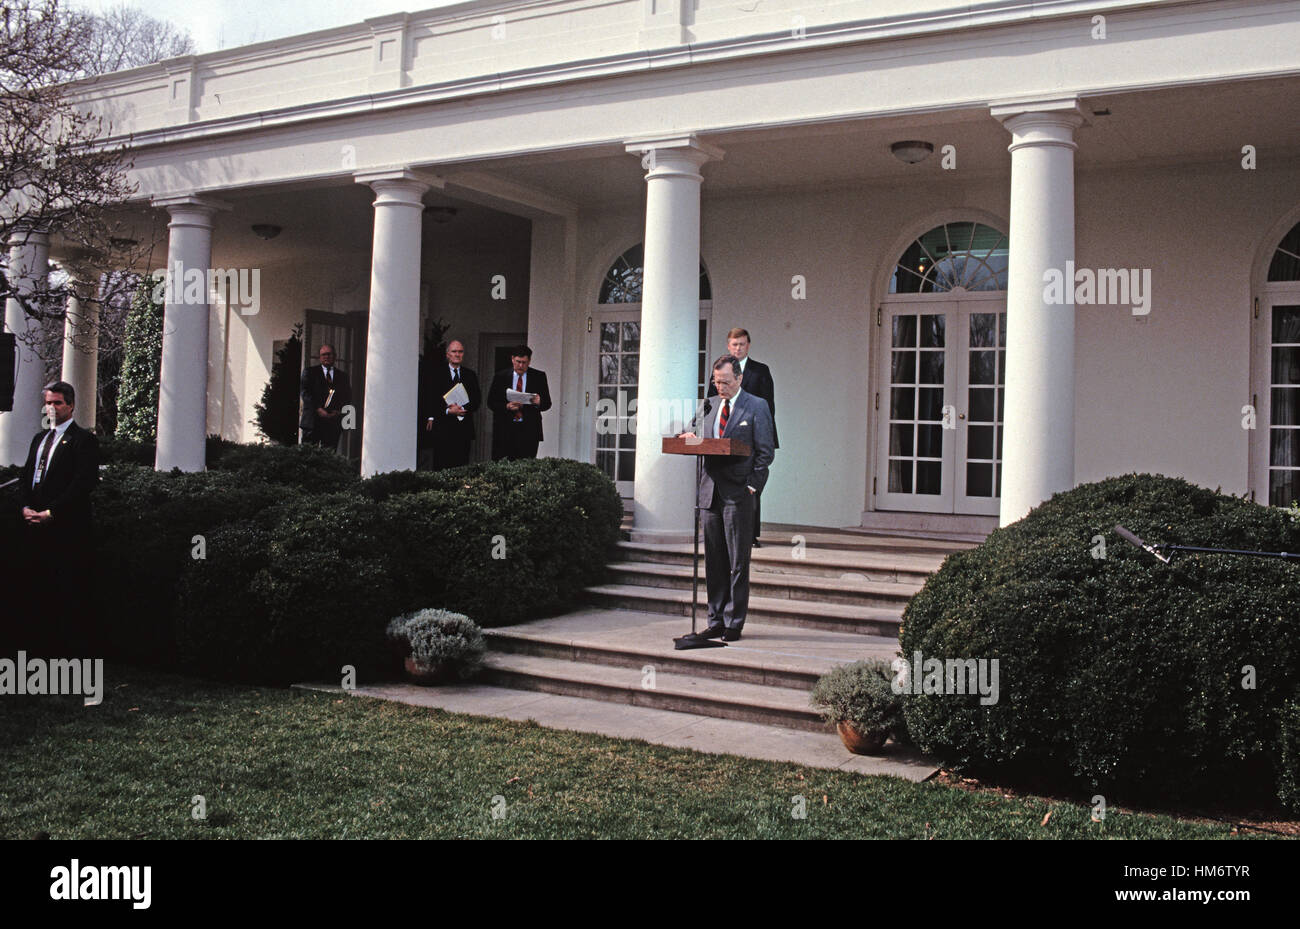 United States President George H.W. Bush reads a statement rejecting the proposed Soviet peace agreement to end the Gulf War with Iraq in the Rose Garden of the White House in Washington, D.C. on February 22, 1991. Also visible in the photo are White Hous Stock Photo